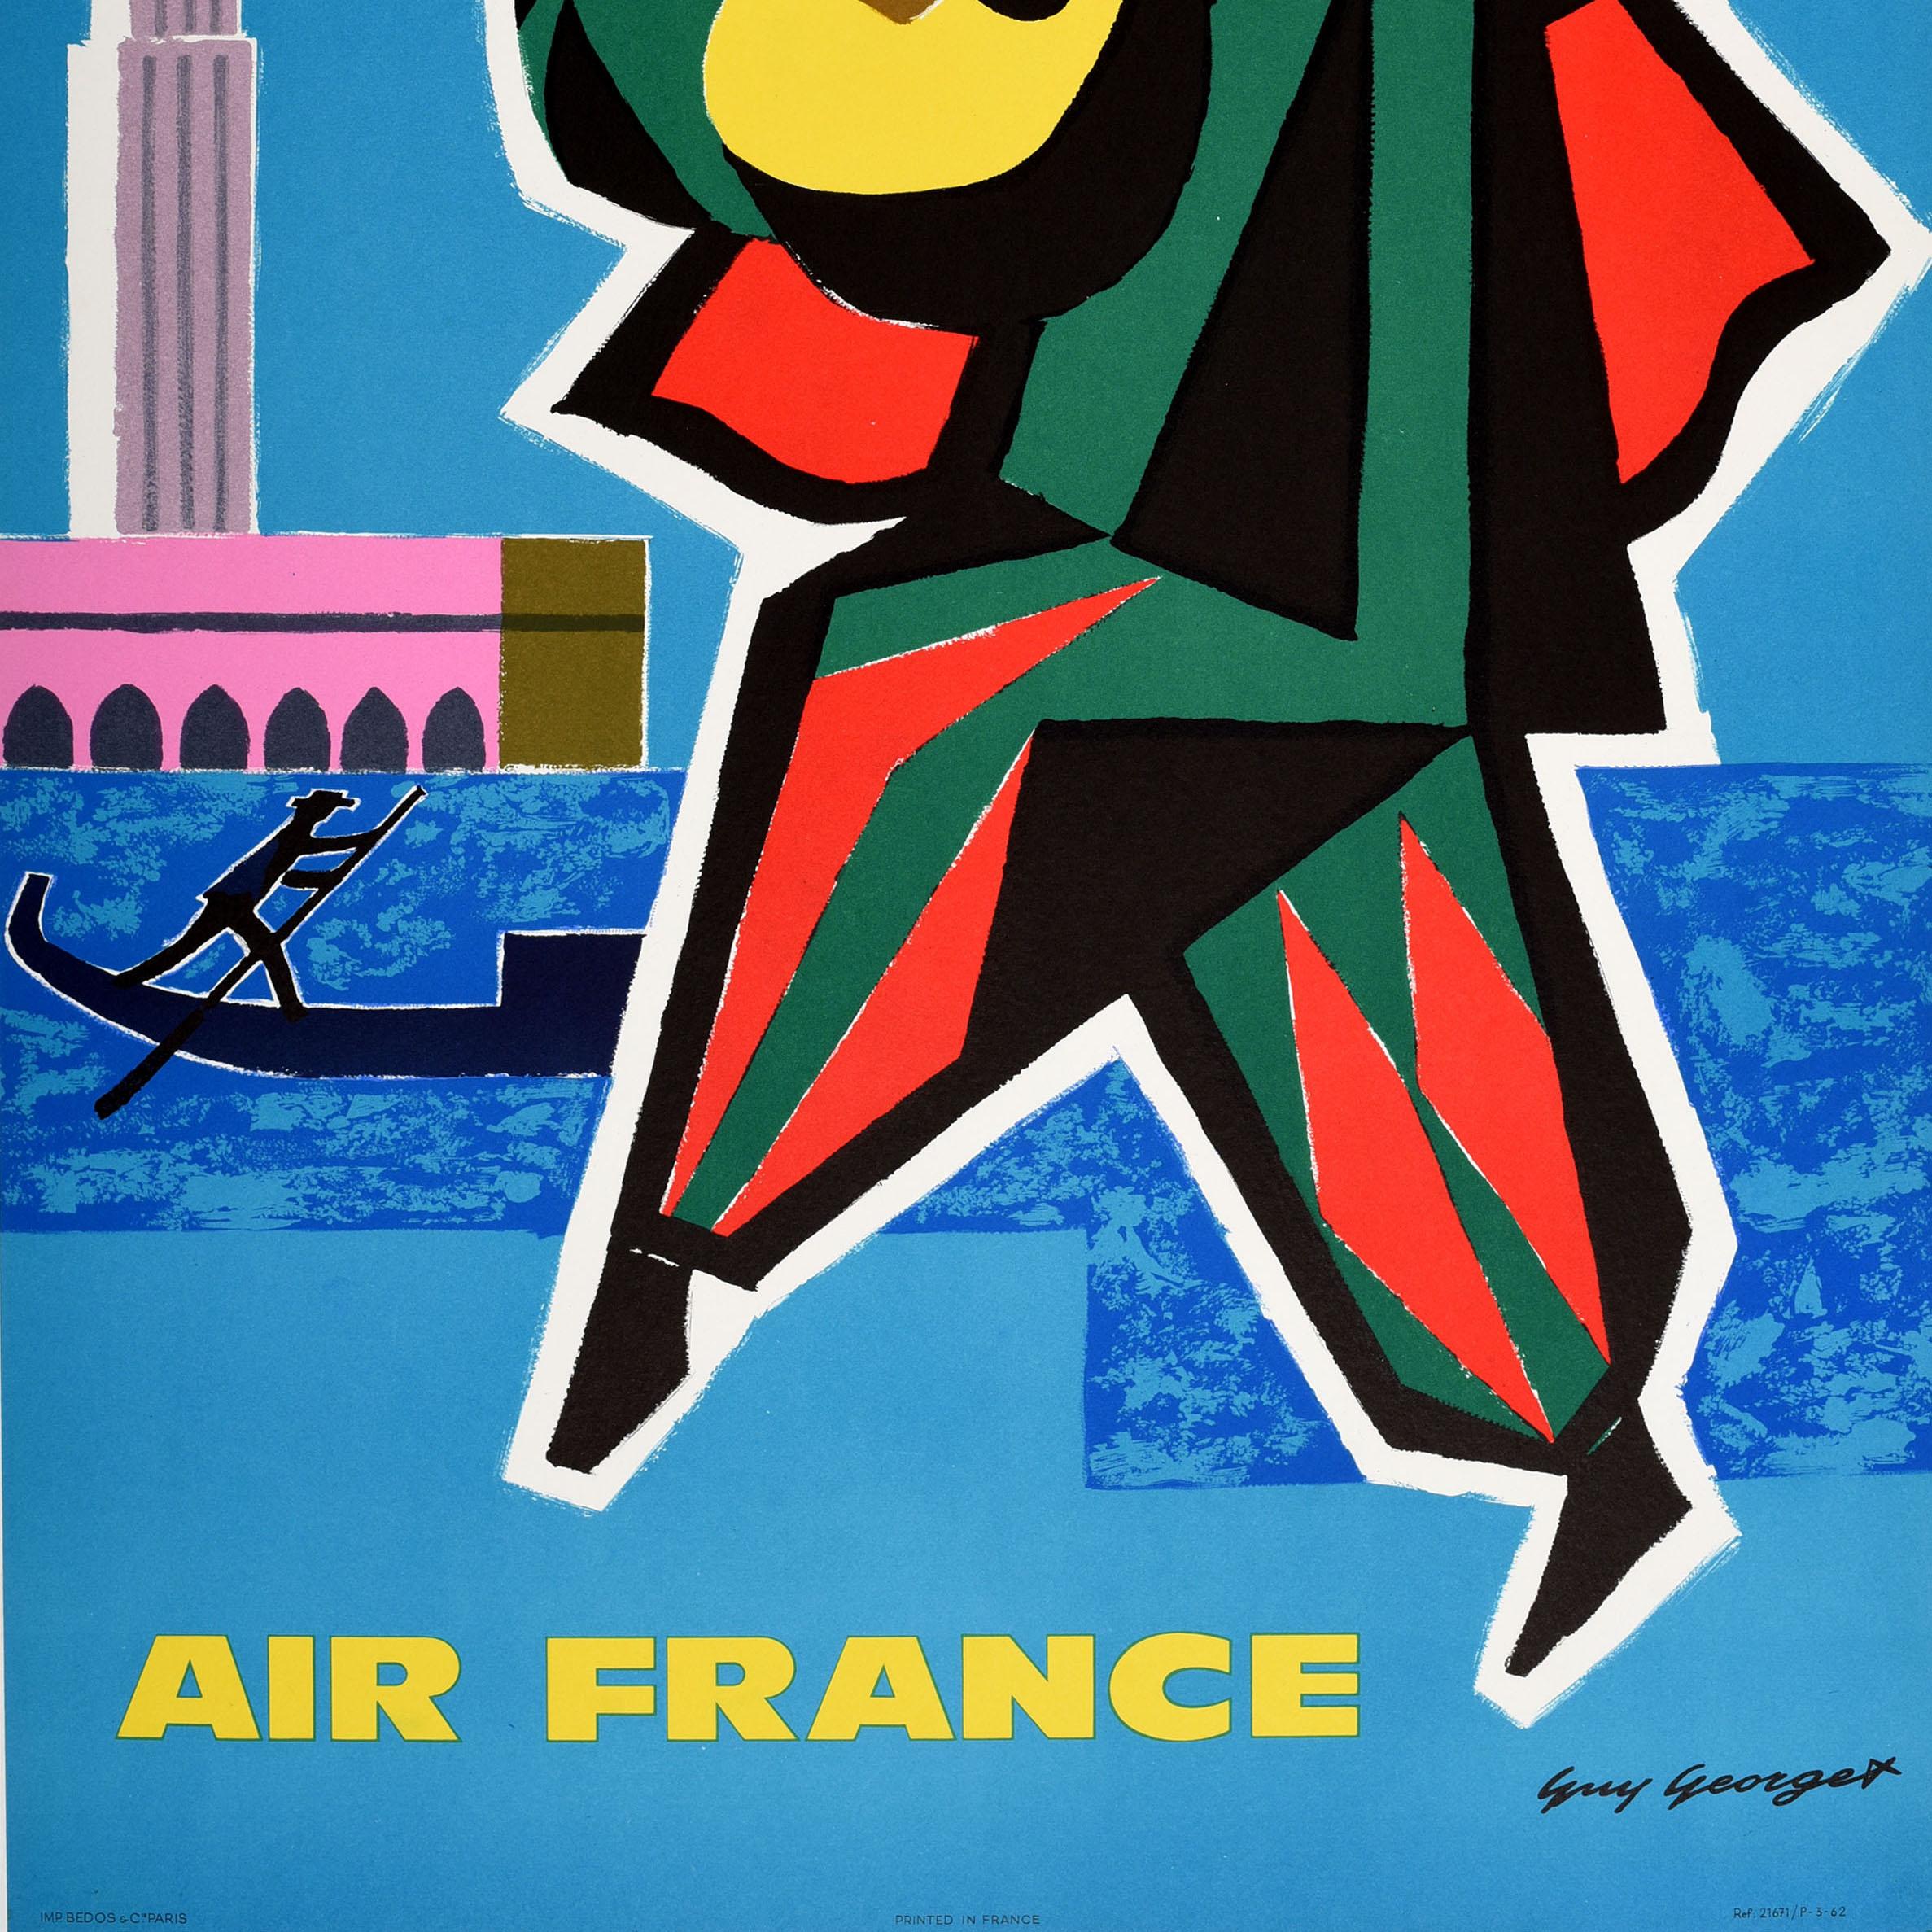 Original Vintage Travel Advertising Poster Italy Venice Air France Guy Georget For Sale 1